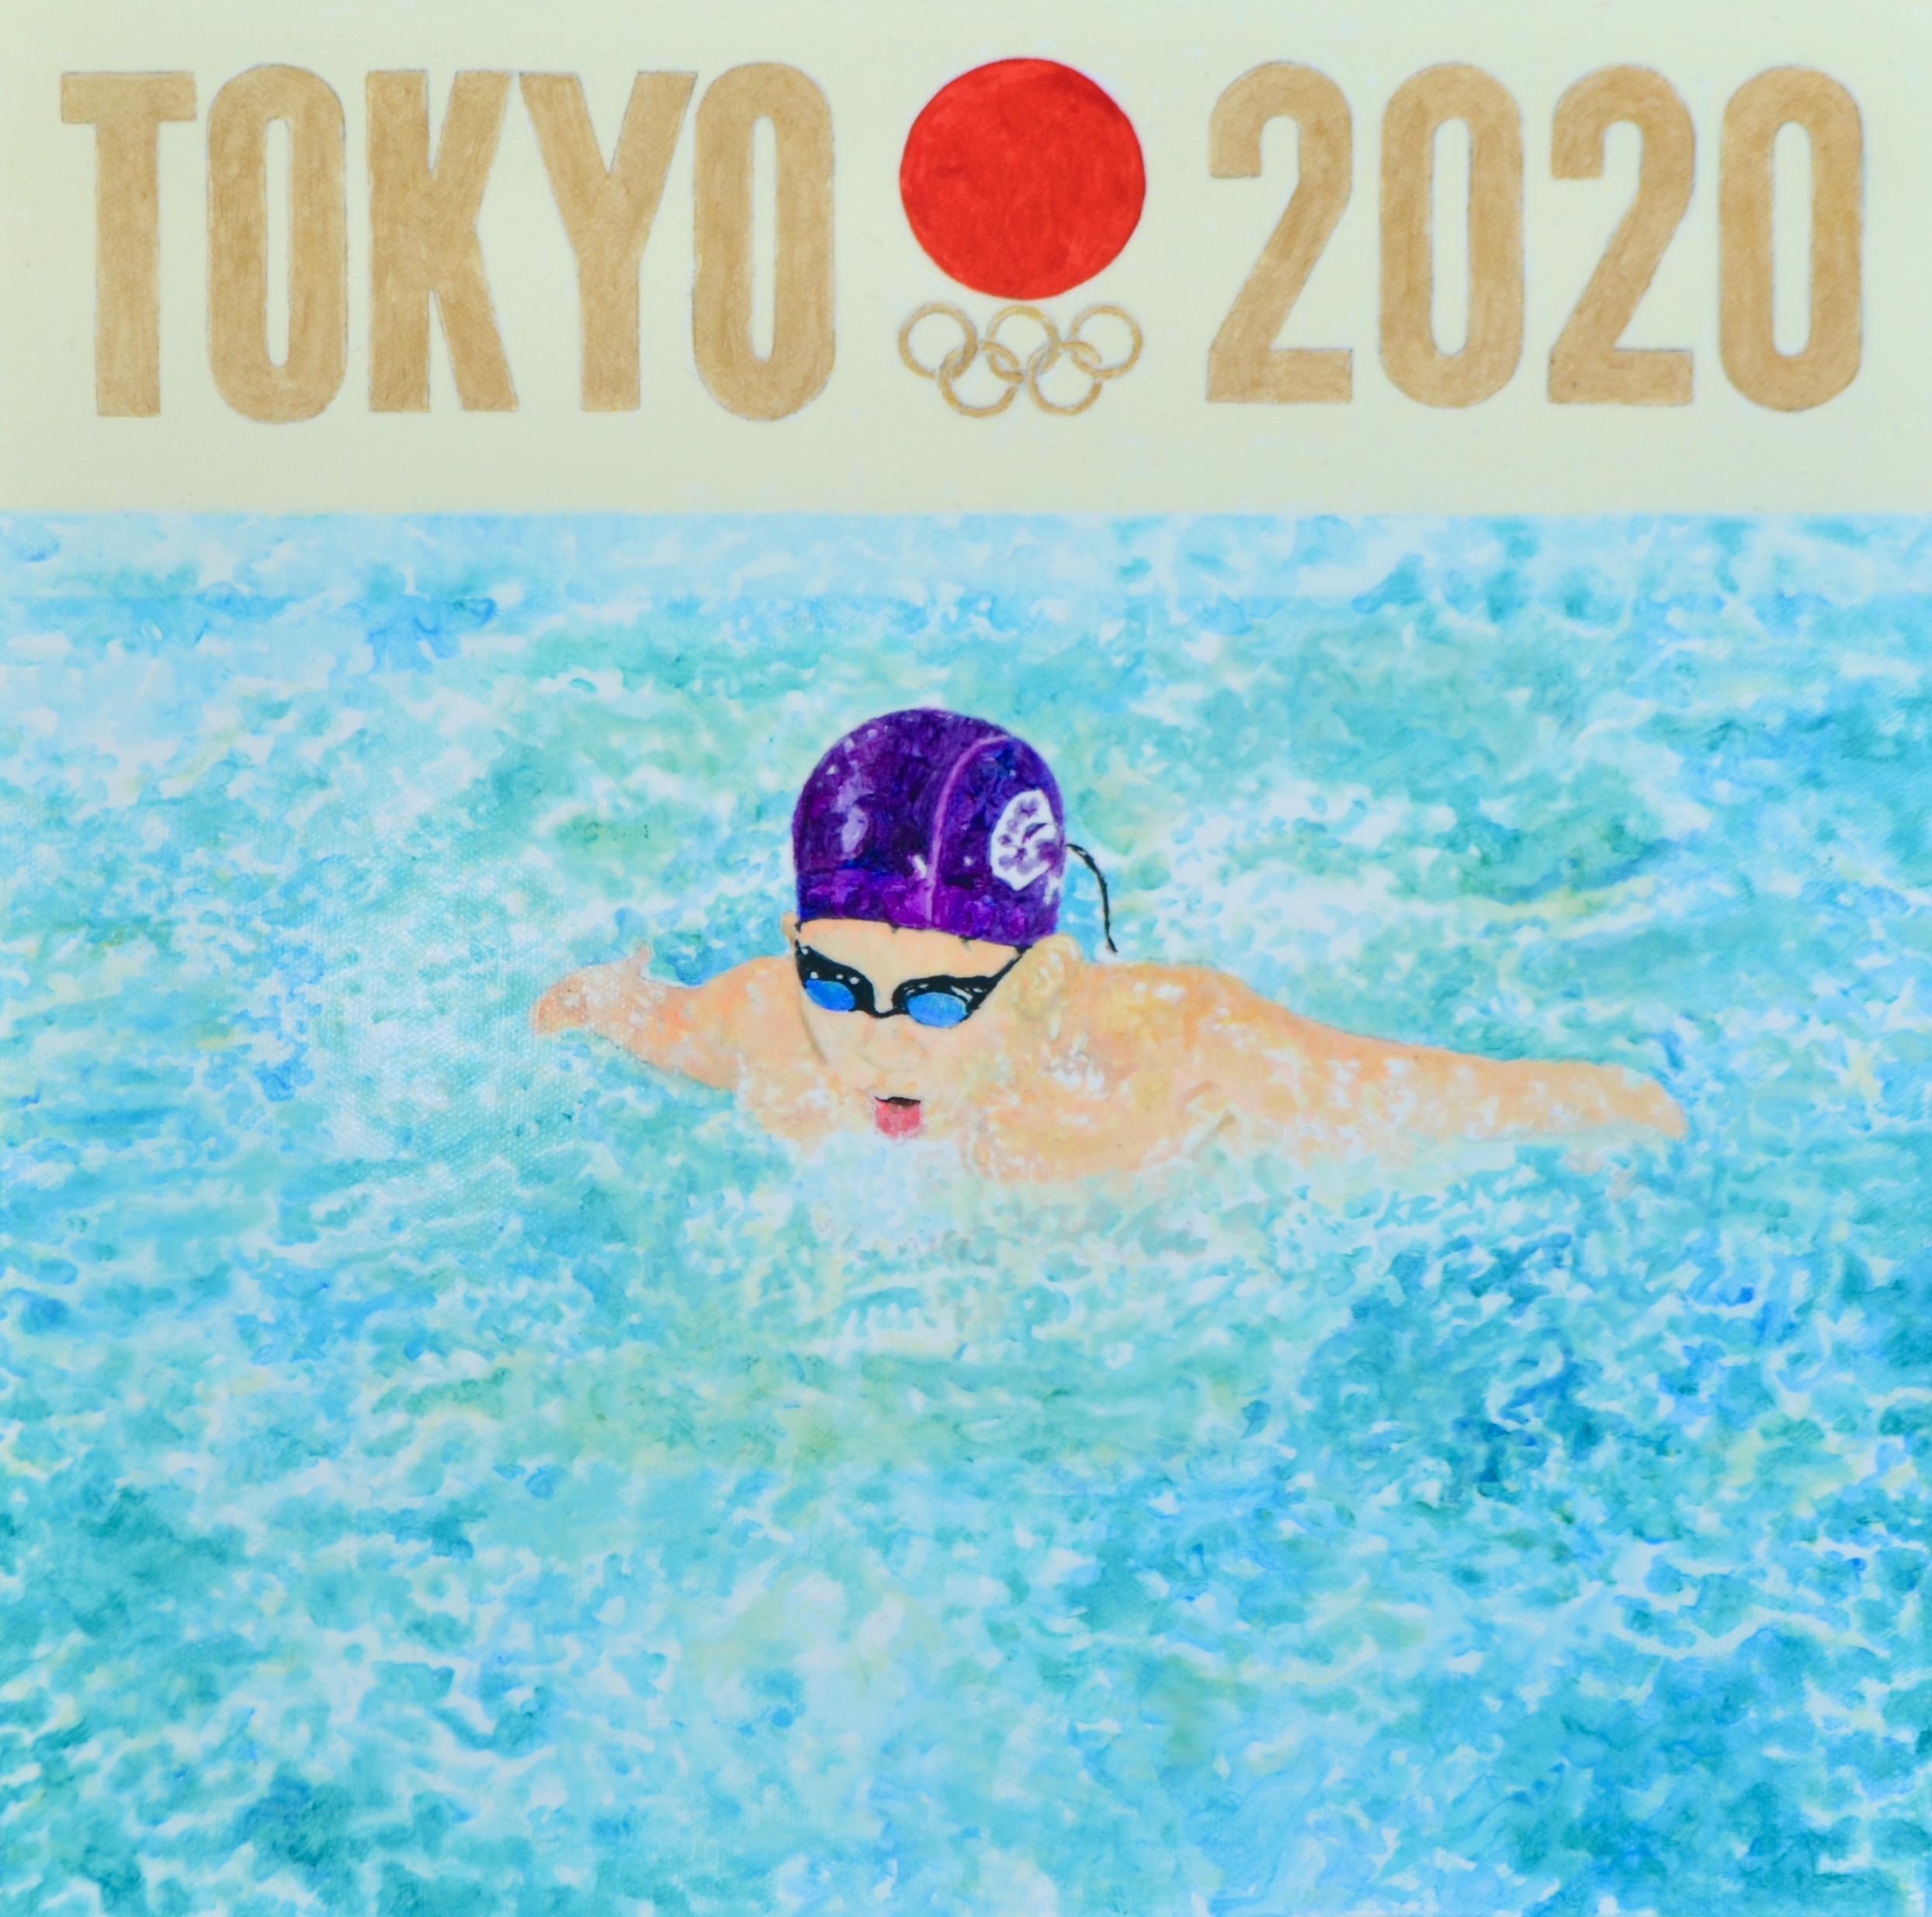 Japanese Contemporary Art by Teppei Ikehila - Tokyo Olympic Poster II